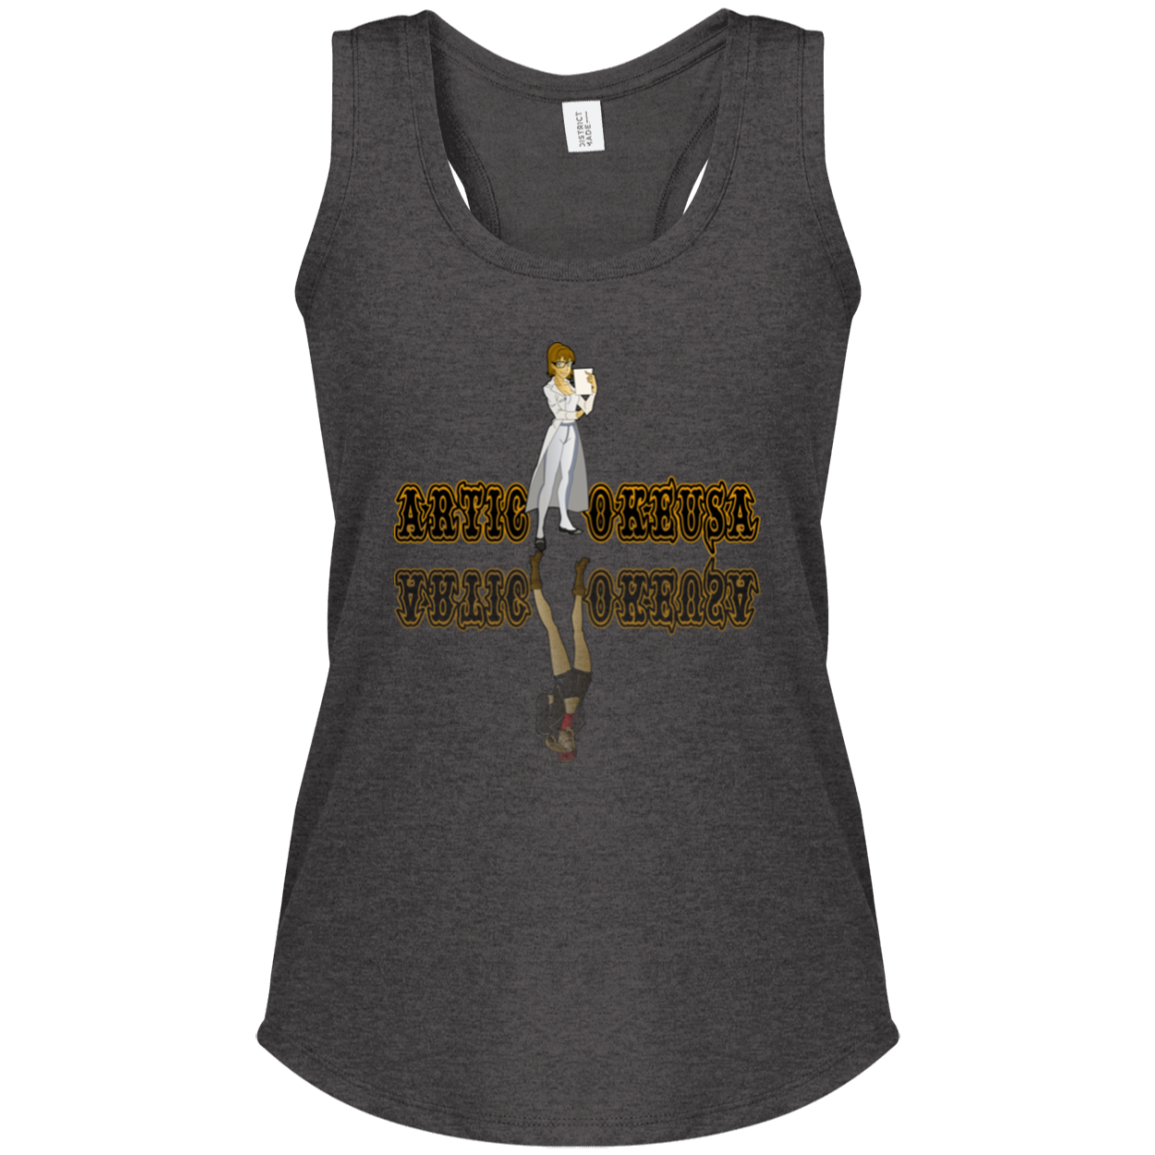 ArtichokeUSA Custom Design. Façade: (Noun) A false appearance that makes someone or something seem more pleasant or better than they really are.  Ladies' Tri Racerback Tank